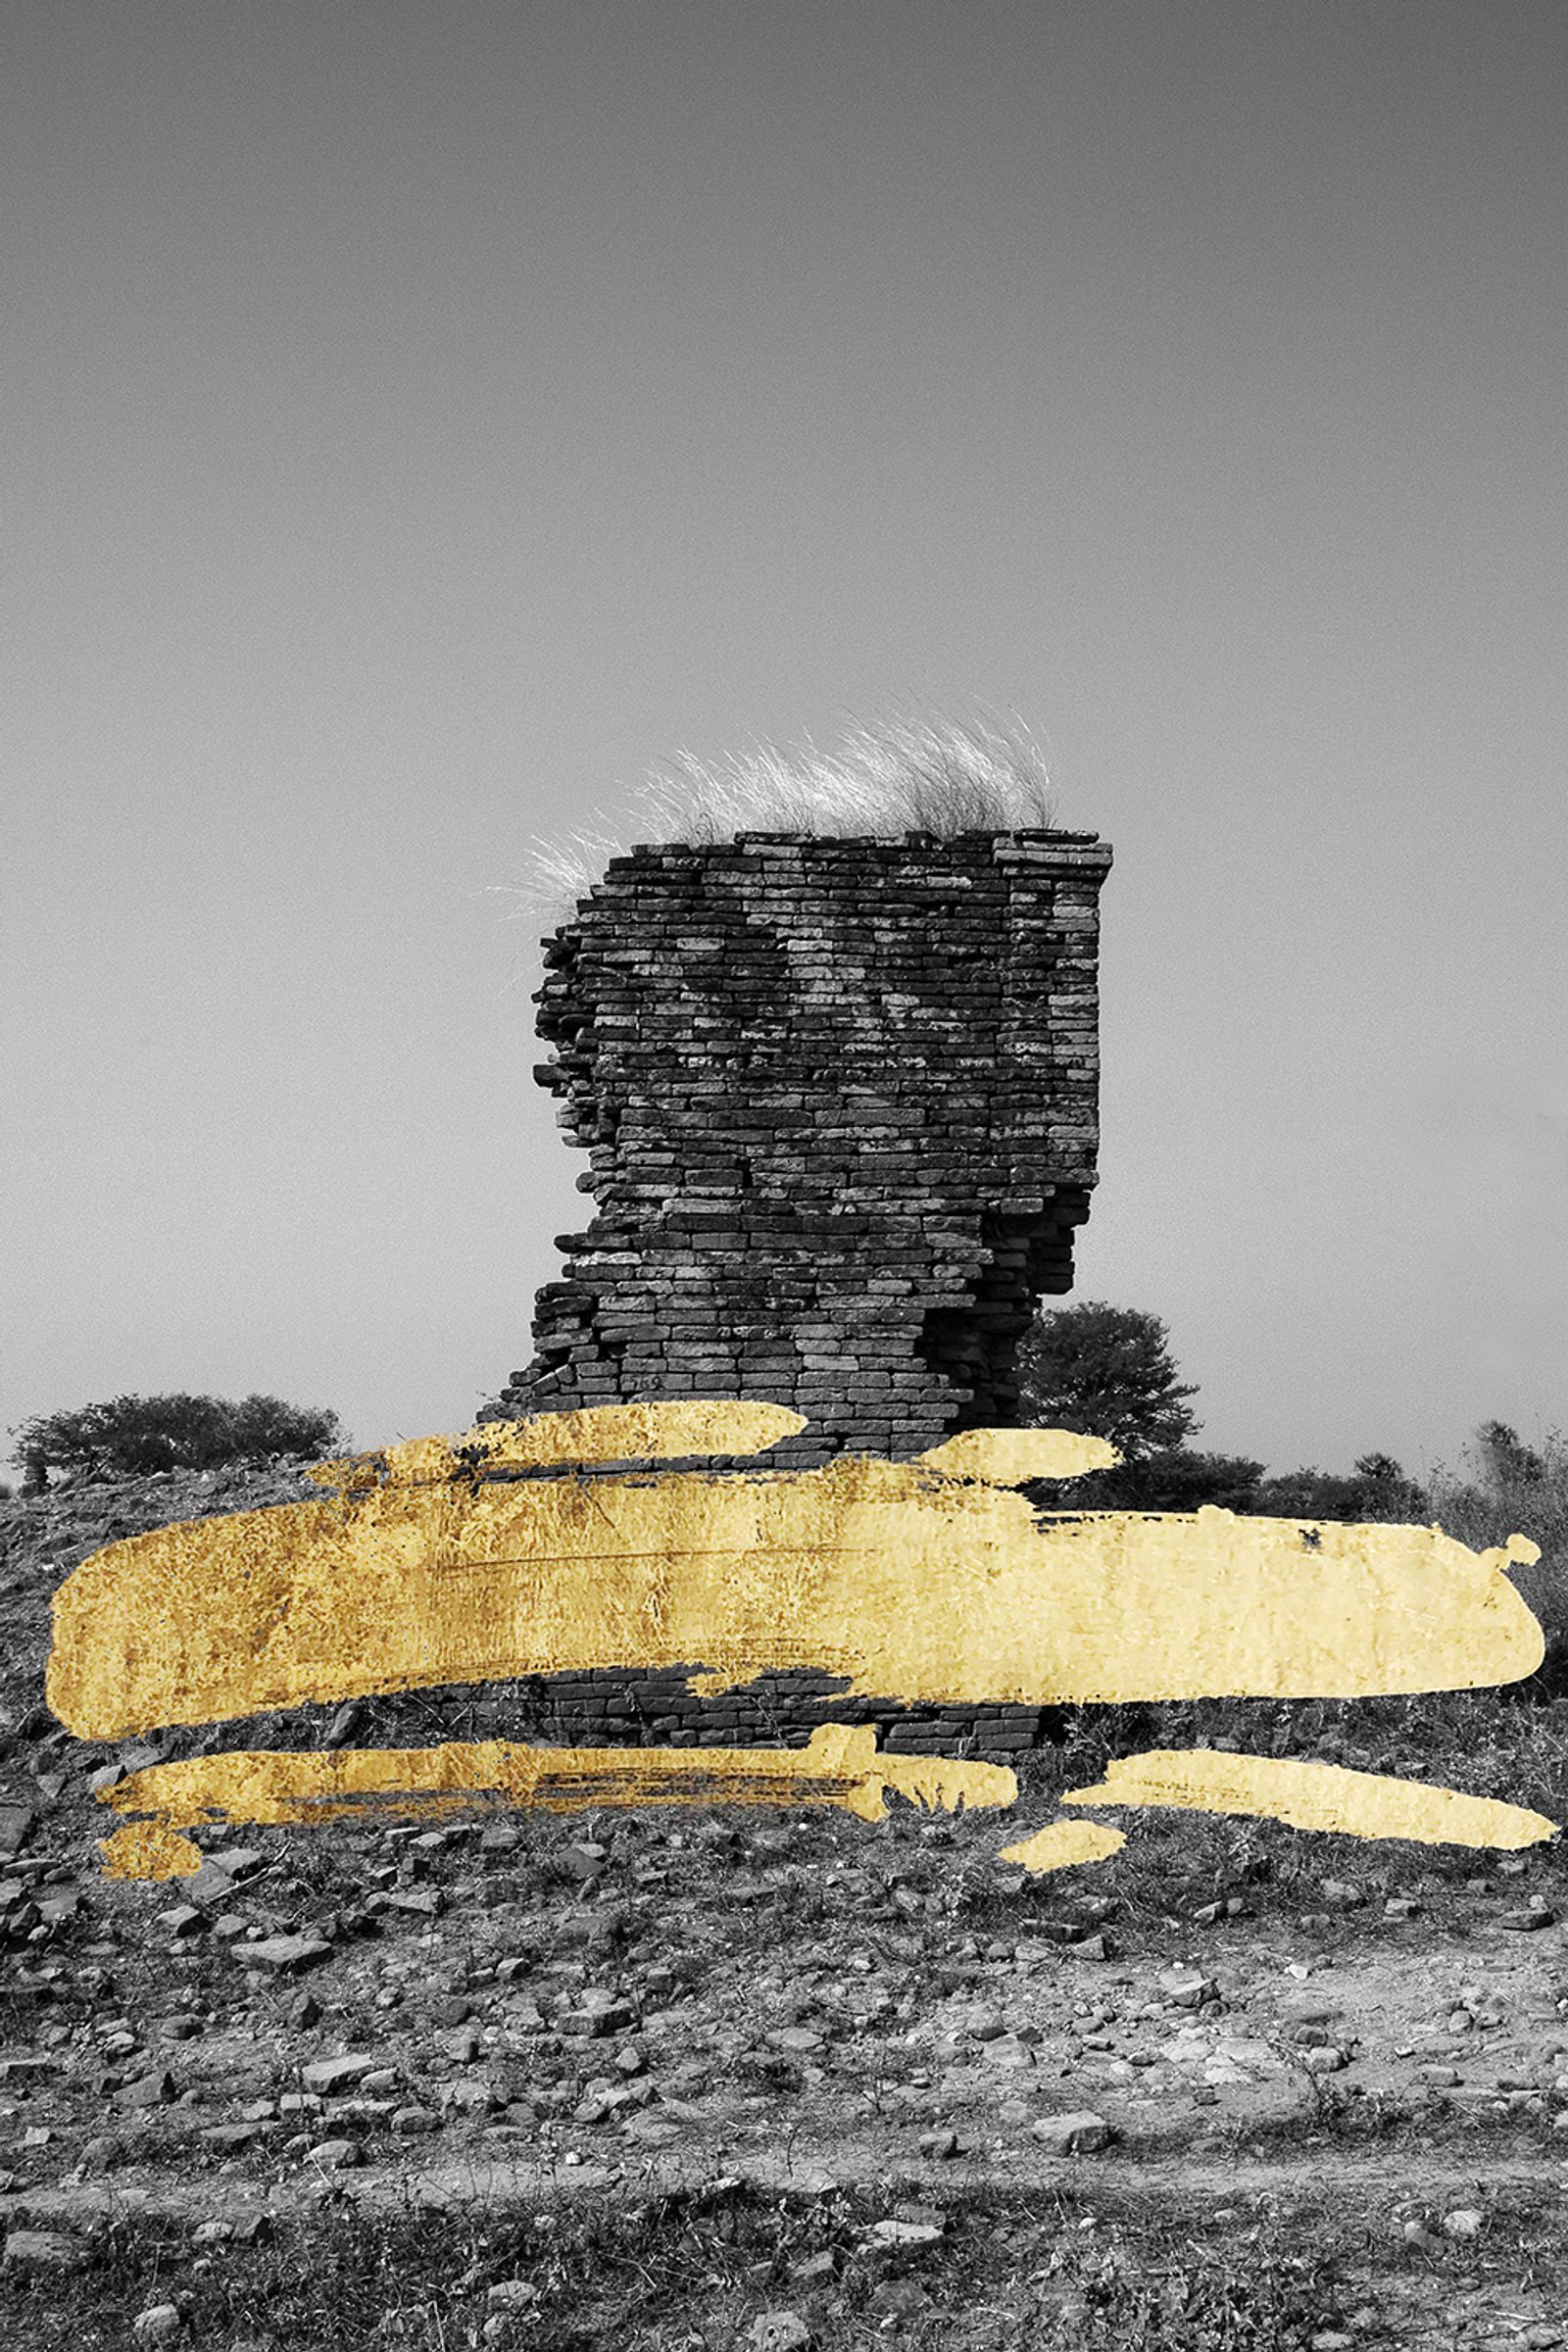 © andrea alkalay - Kutho / Heritage (silhouettes from old ruins remaining from palaces of Pagan kingdom. Gold intervention )